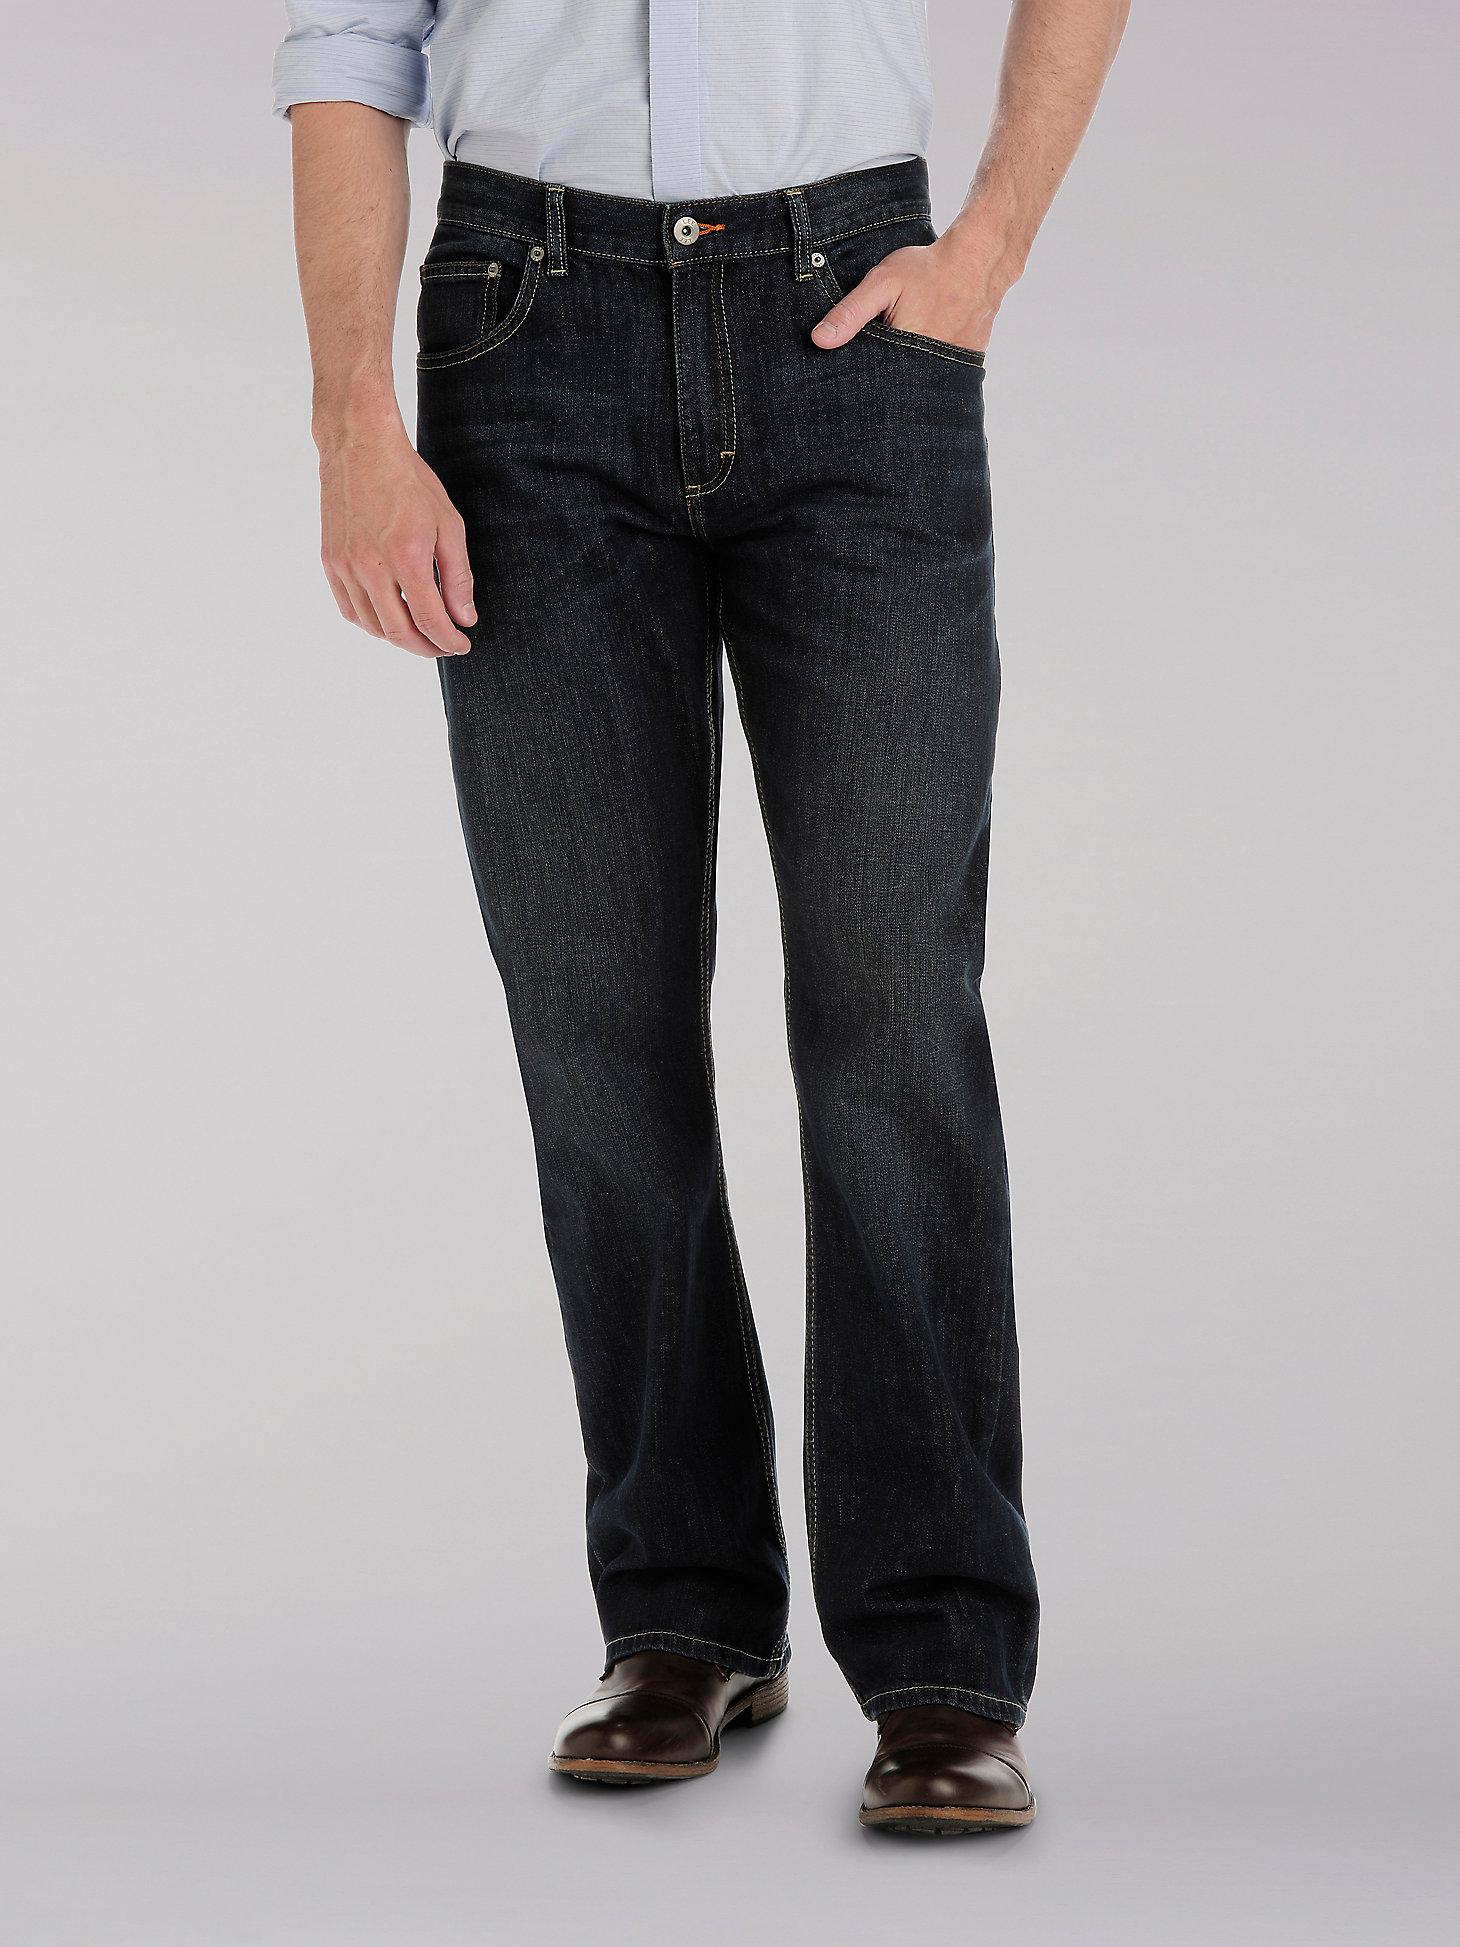 Men’s Modern Series Relaxed Bootcut Jeans in Eagle Eye main view